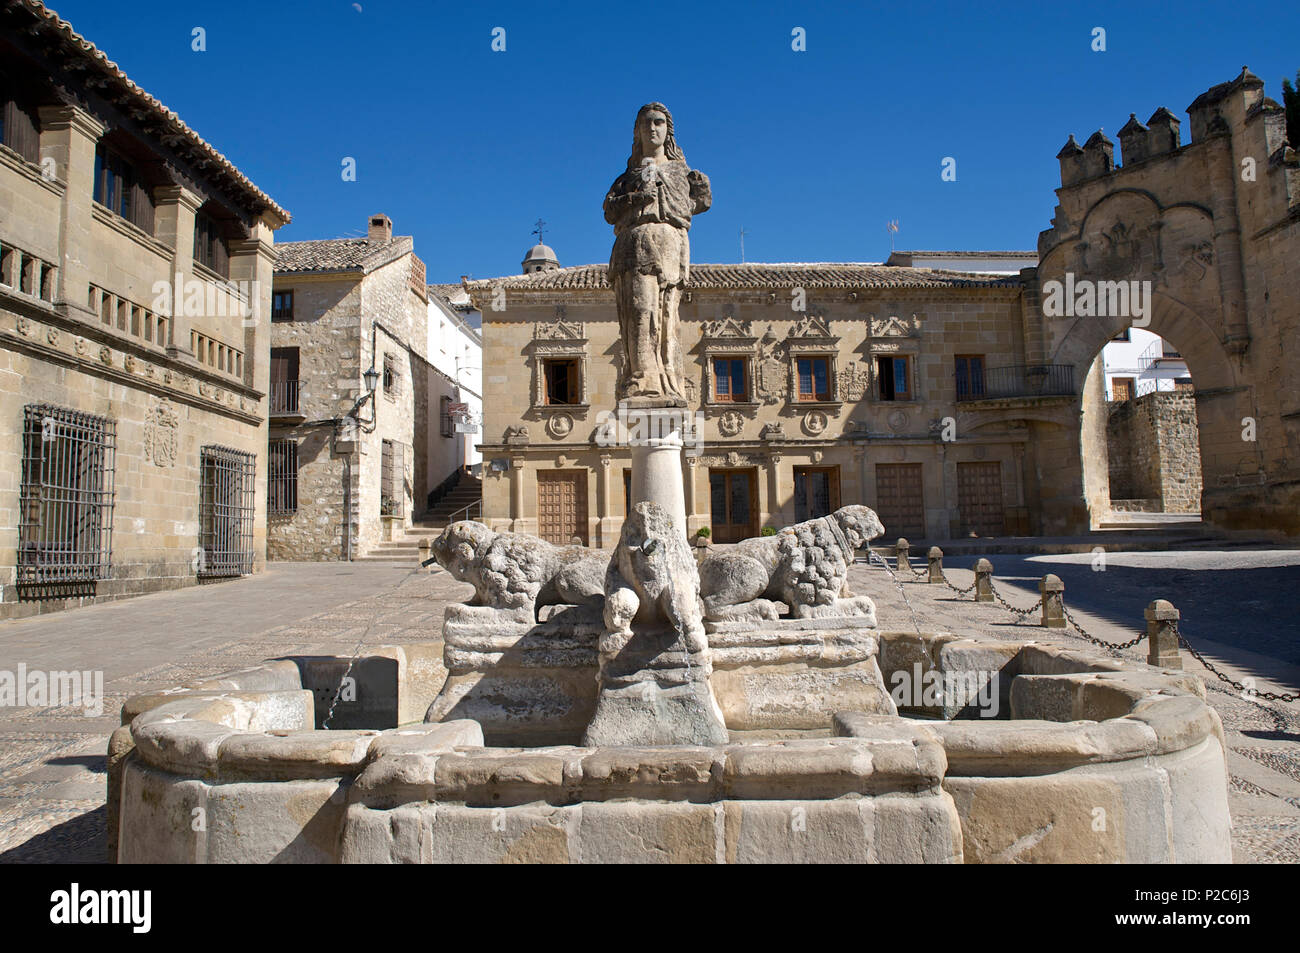 Lions fountain on the Plaza del Populo in Baeza, Jaen province, Andalusia, Spain Stock Photo